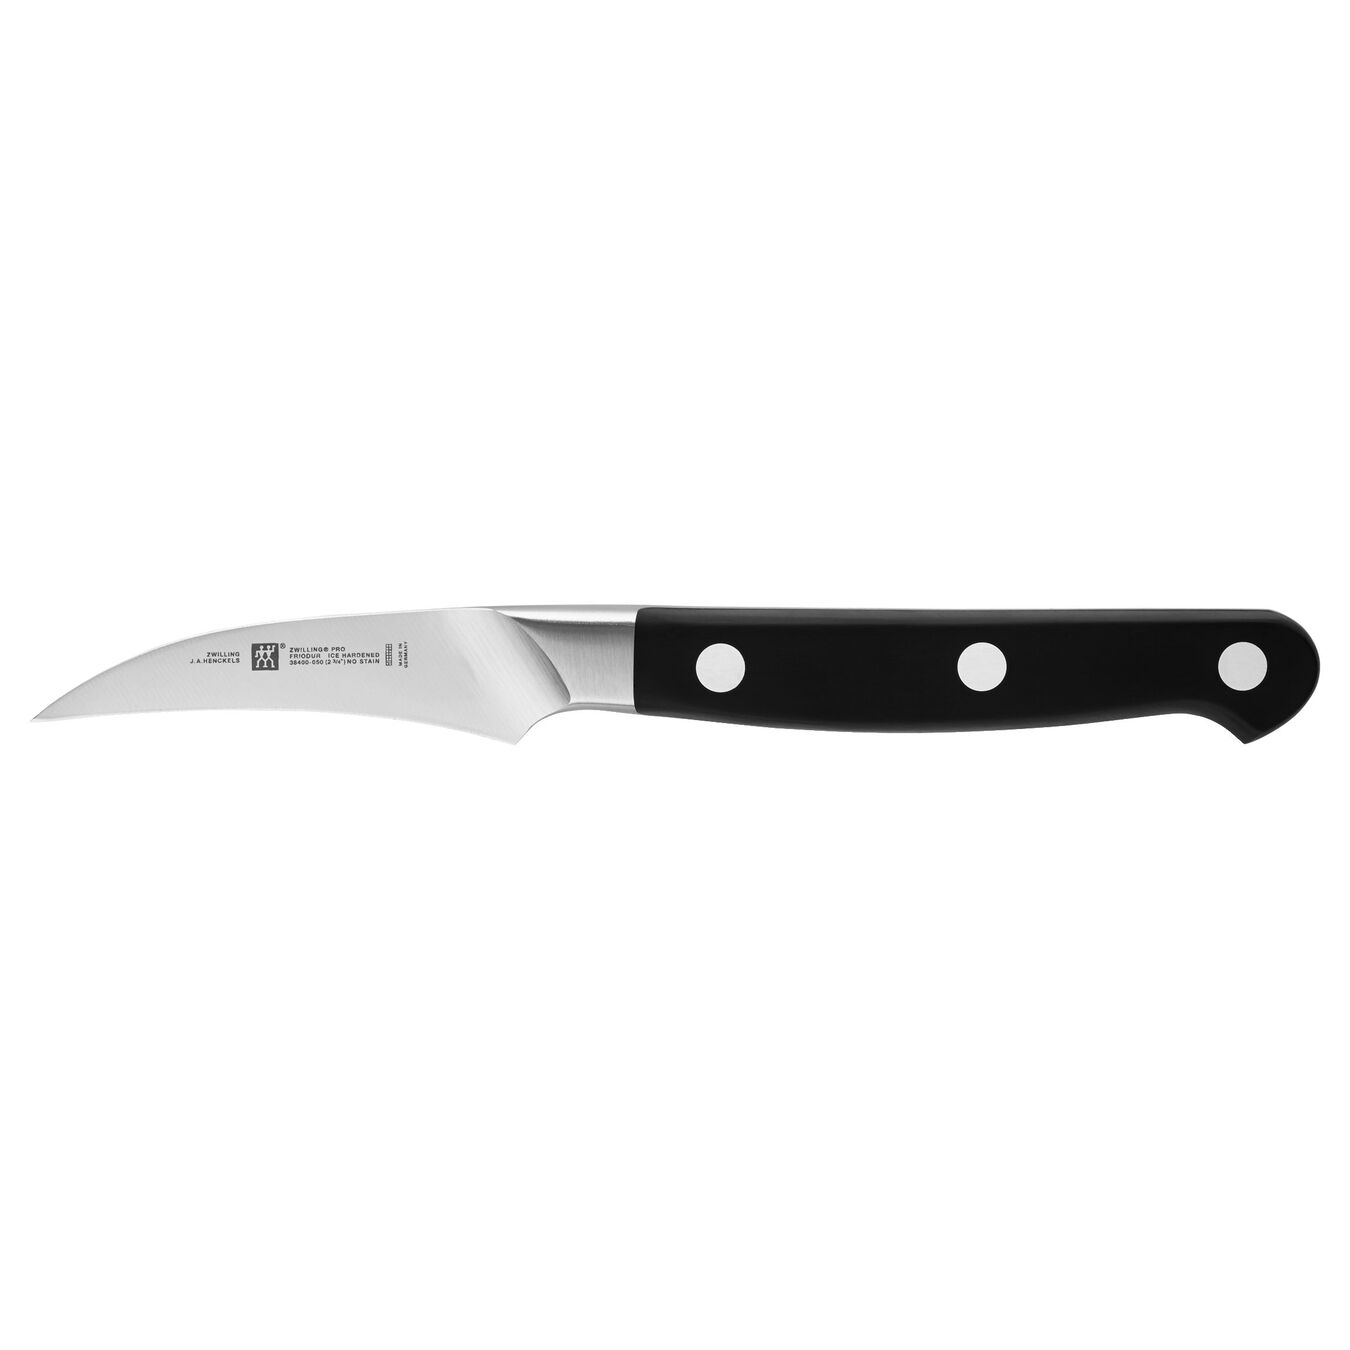 curved peeling knife with riveted black handle on white background